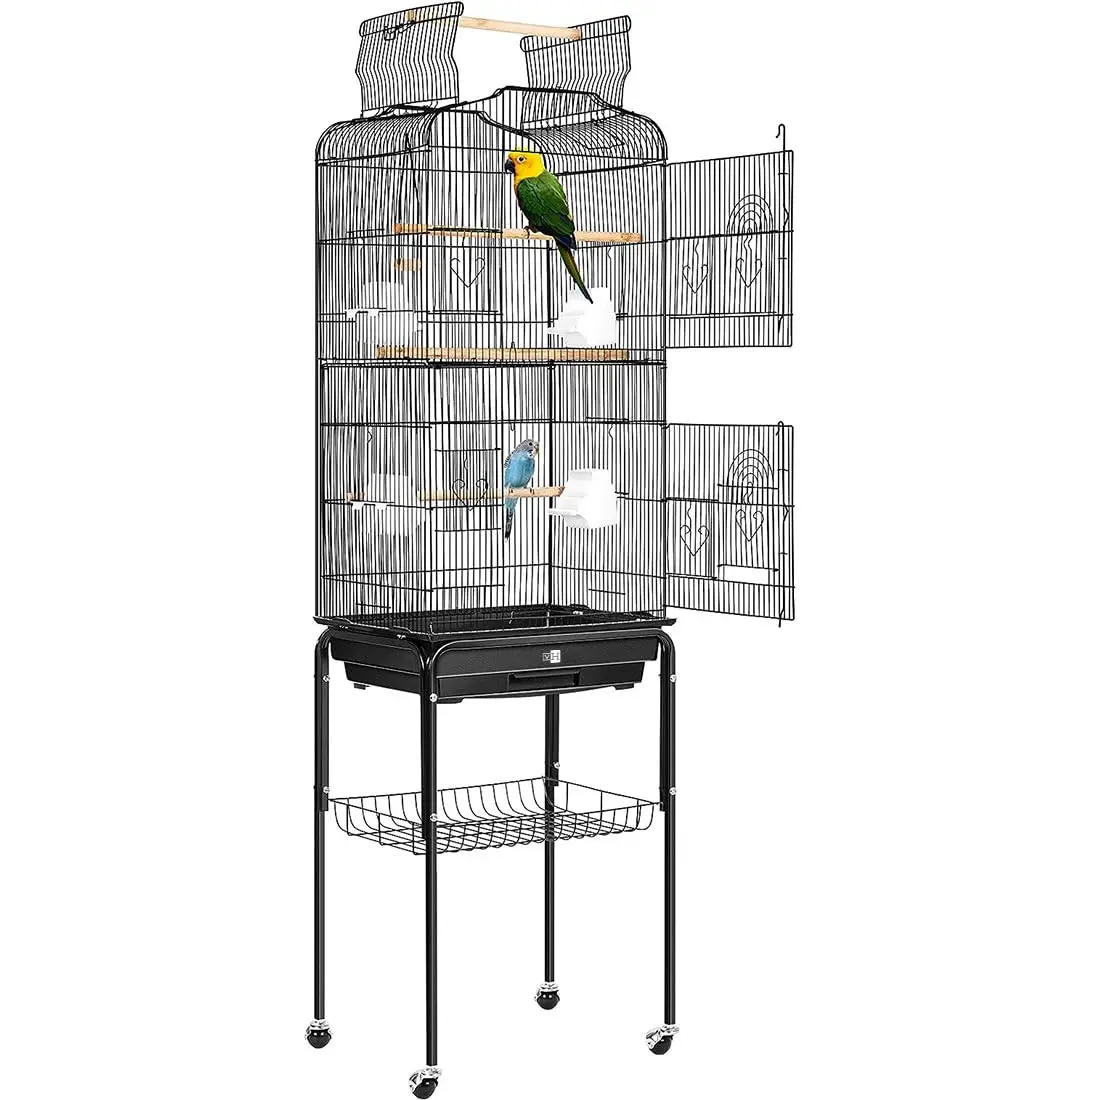 

64 Inch Bird Cage with Play Top and Rolling Stand for Parrots Conures Lovebird Cockatiel Parakeets Black